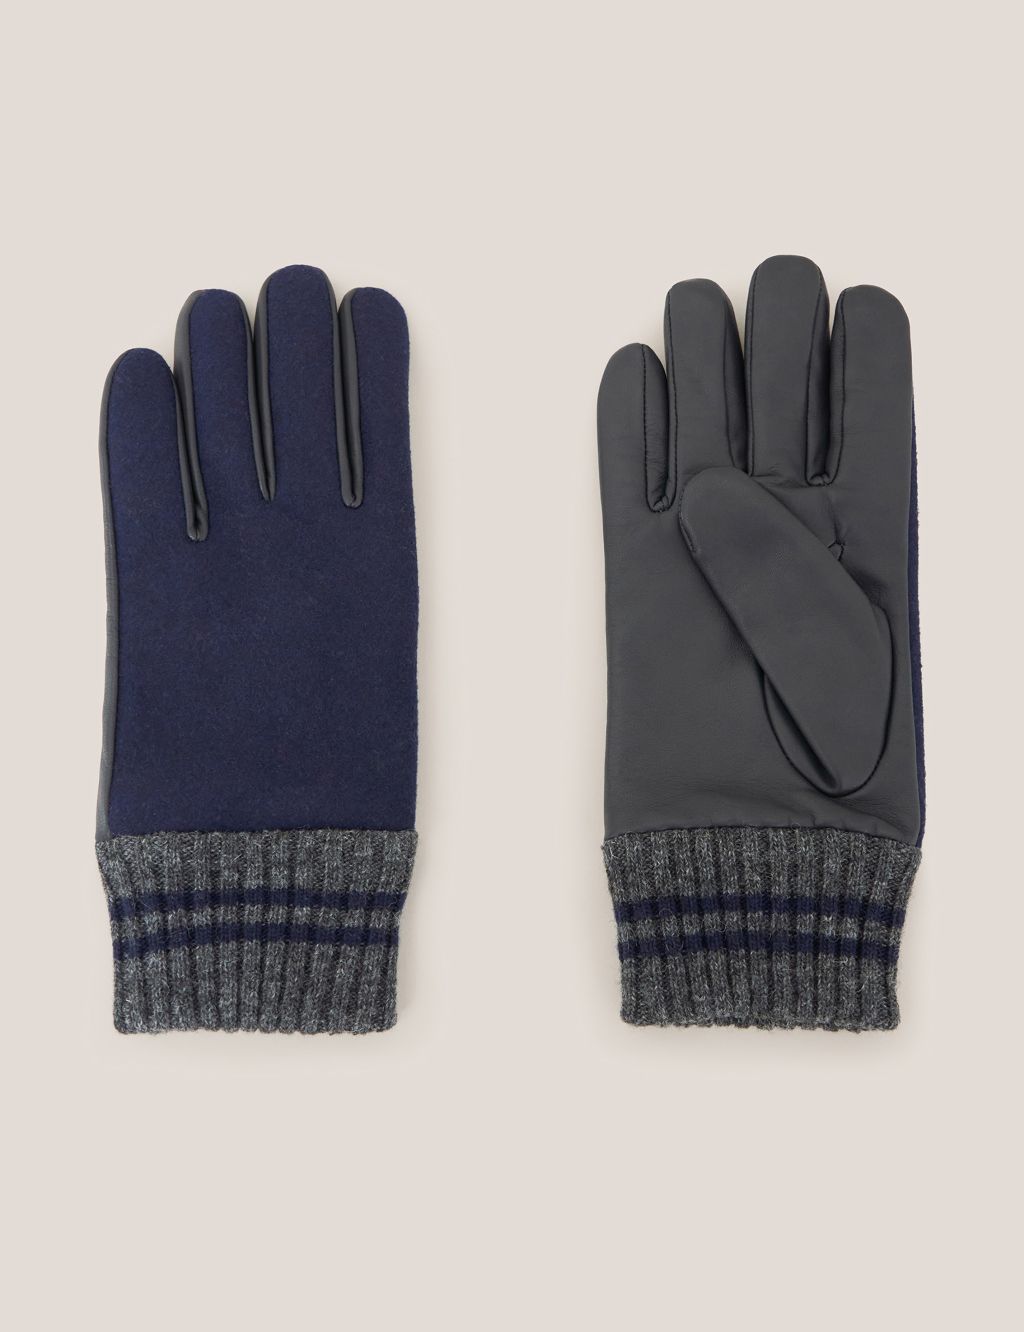 Wool Rich & Leather Gloves image 1